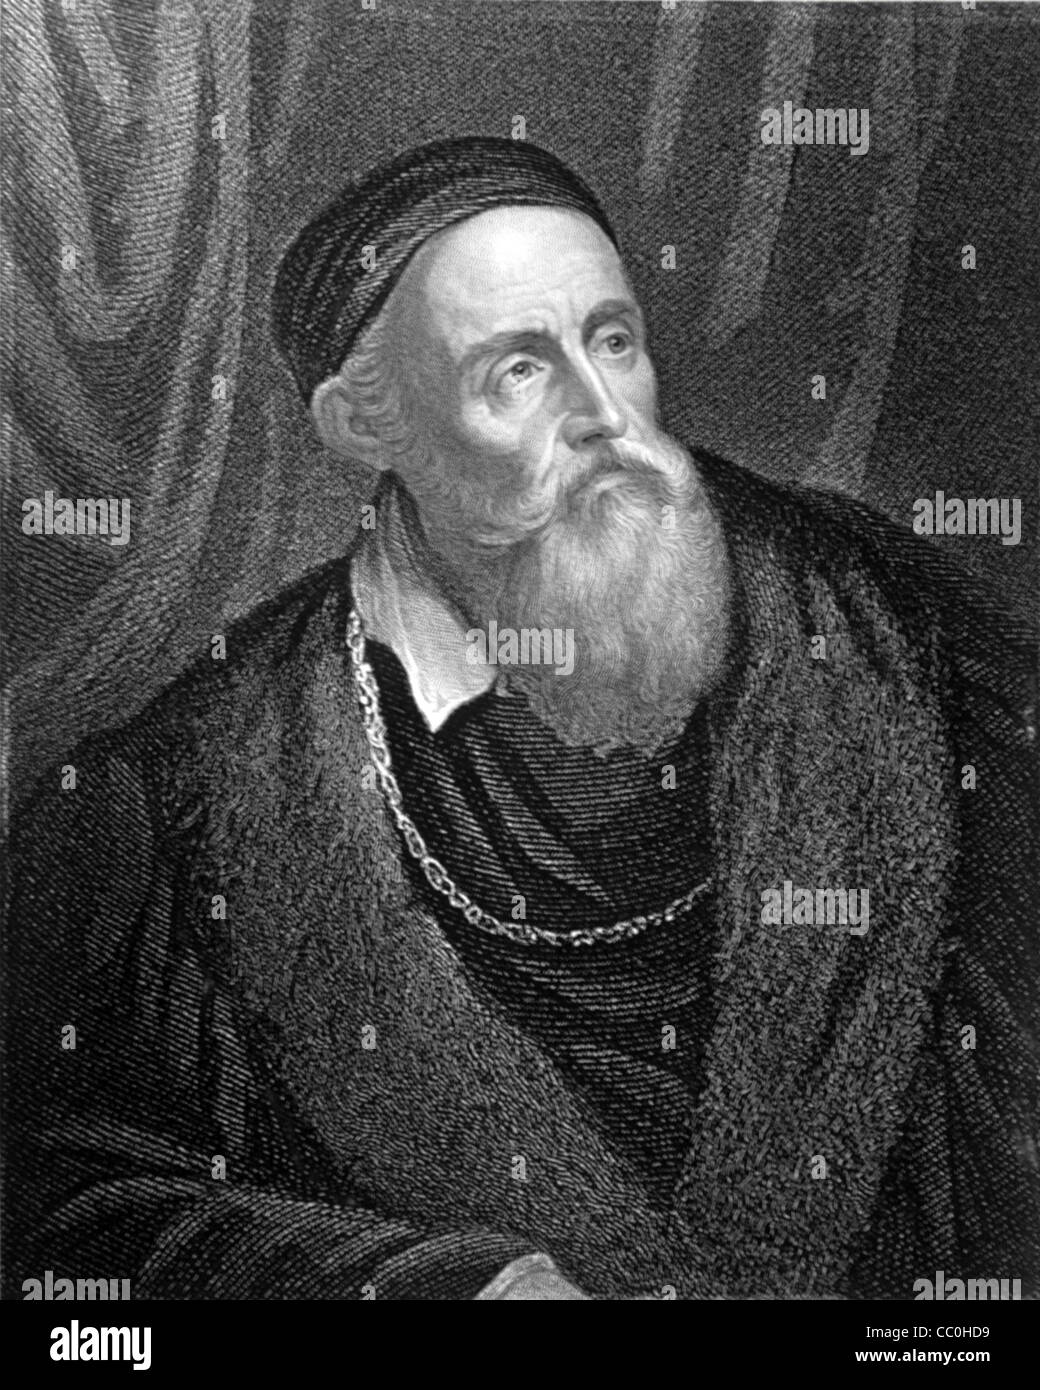 Portrait of Titian, Tiziano Vecelli or Vecellio (c1488/90-1576) Venetian & Italian Painter c19th Engraving by W. Holl after Titian Painting. Vintage Illustration or Engraving Stock Photo